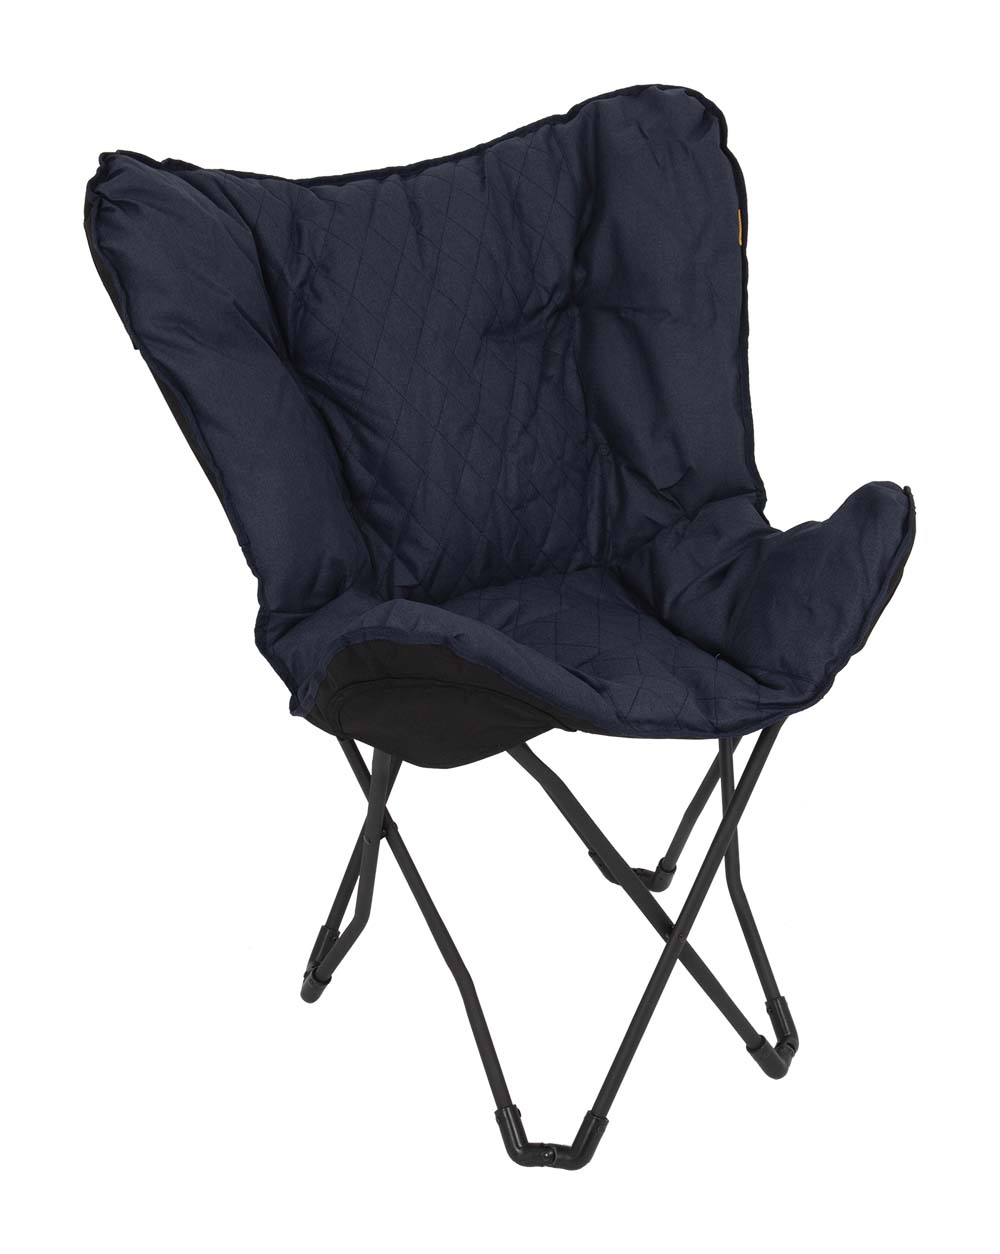 1200330 "A 'must-have' butterfly chair. This luxurious chair has a stitched pattern. Very comfortable because of the padded Cationic fabric and the wide and deep seat. The steel frame is easy to fold, making the chair easy to carry, including carrying bag. An ideal chair for the garden or camping, but also on the balcony and in the living room."